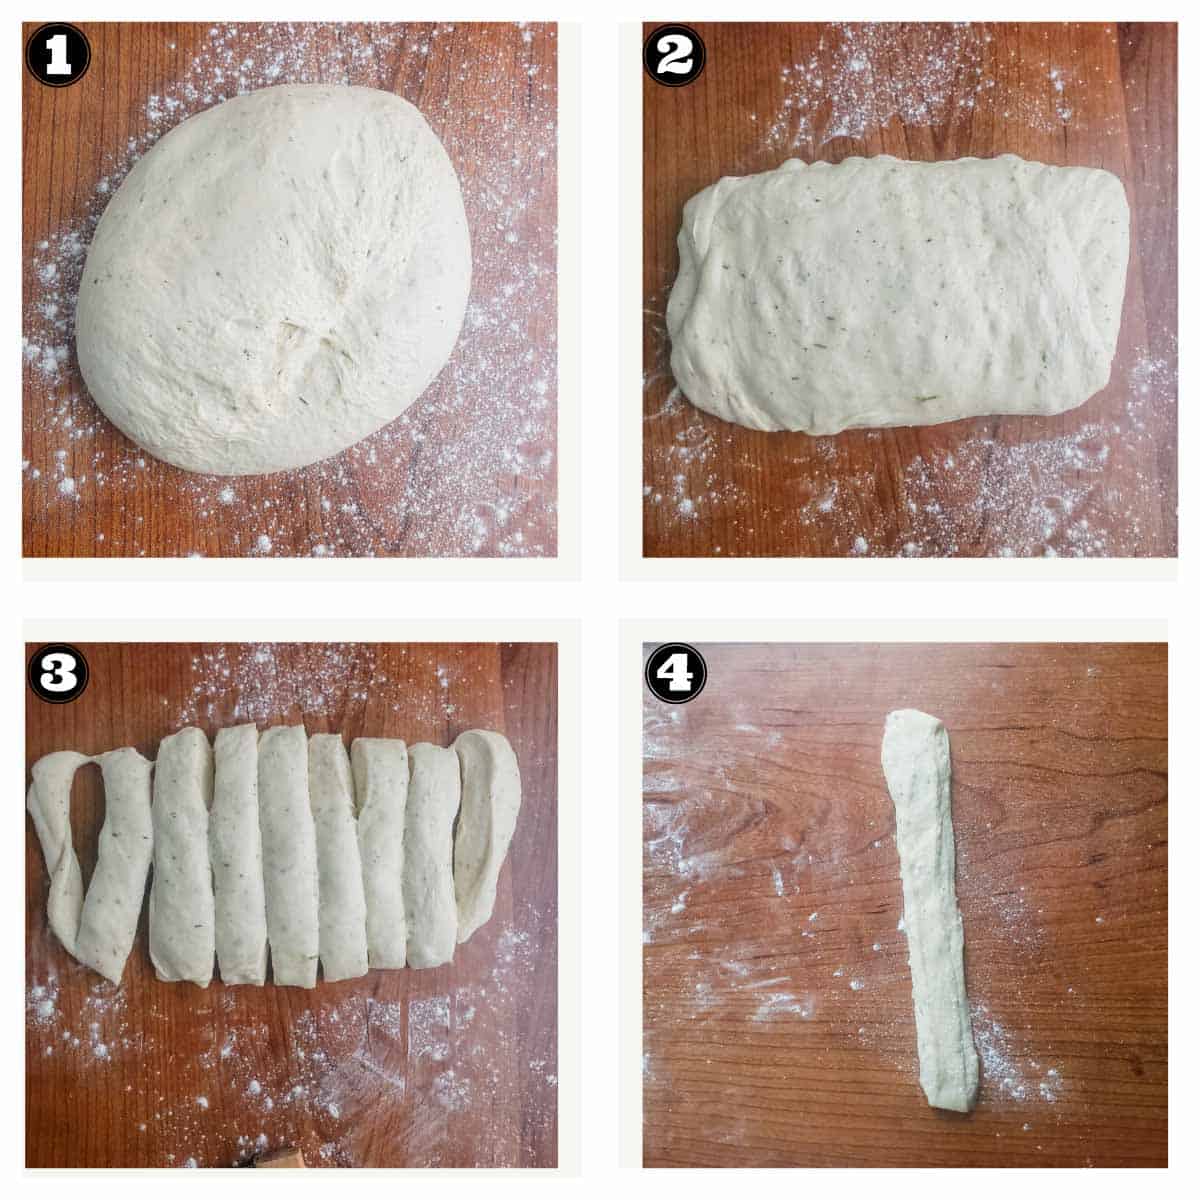 images showing stages of shaping the breadsticks.